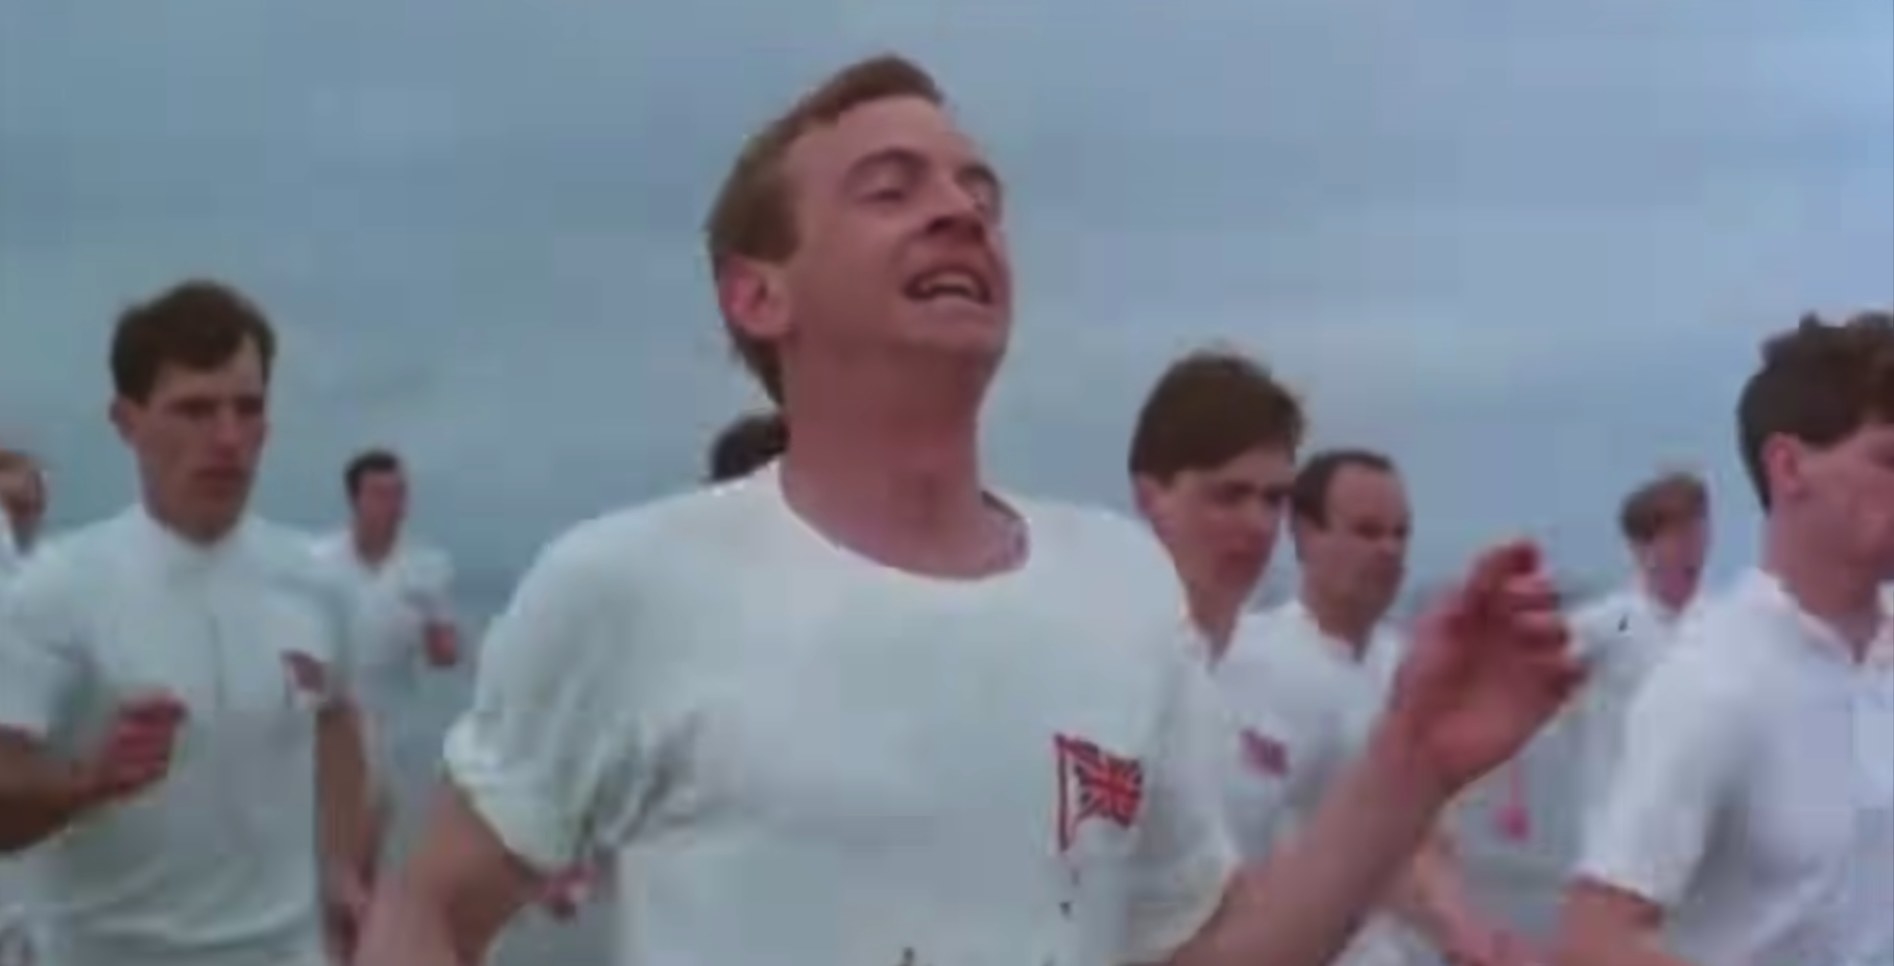 Men wearing white run across a beach in &quot;Chariots of Fire&quot;